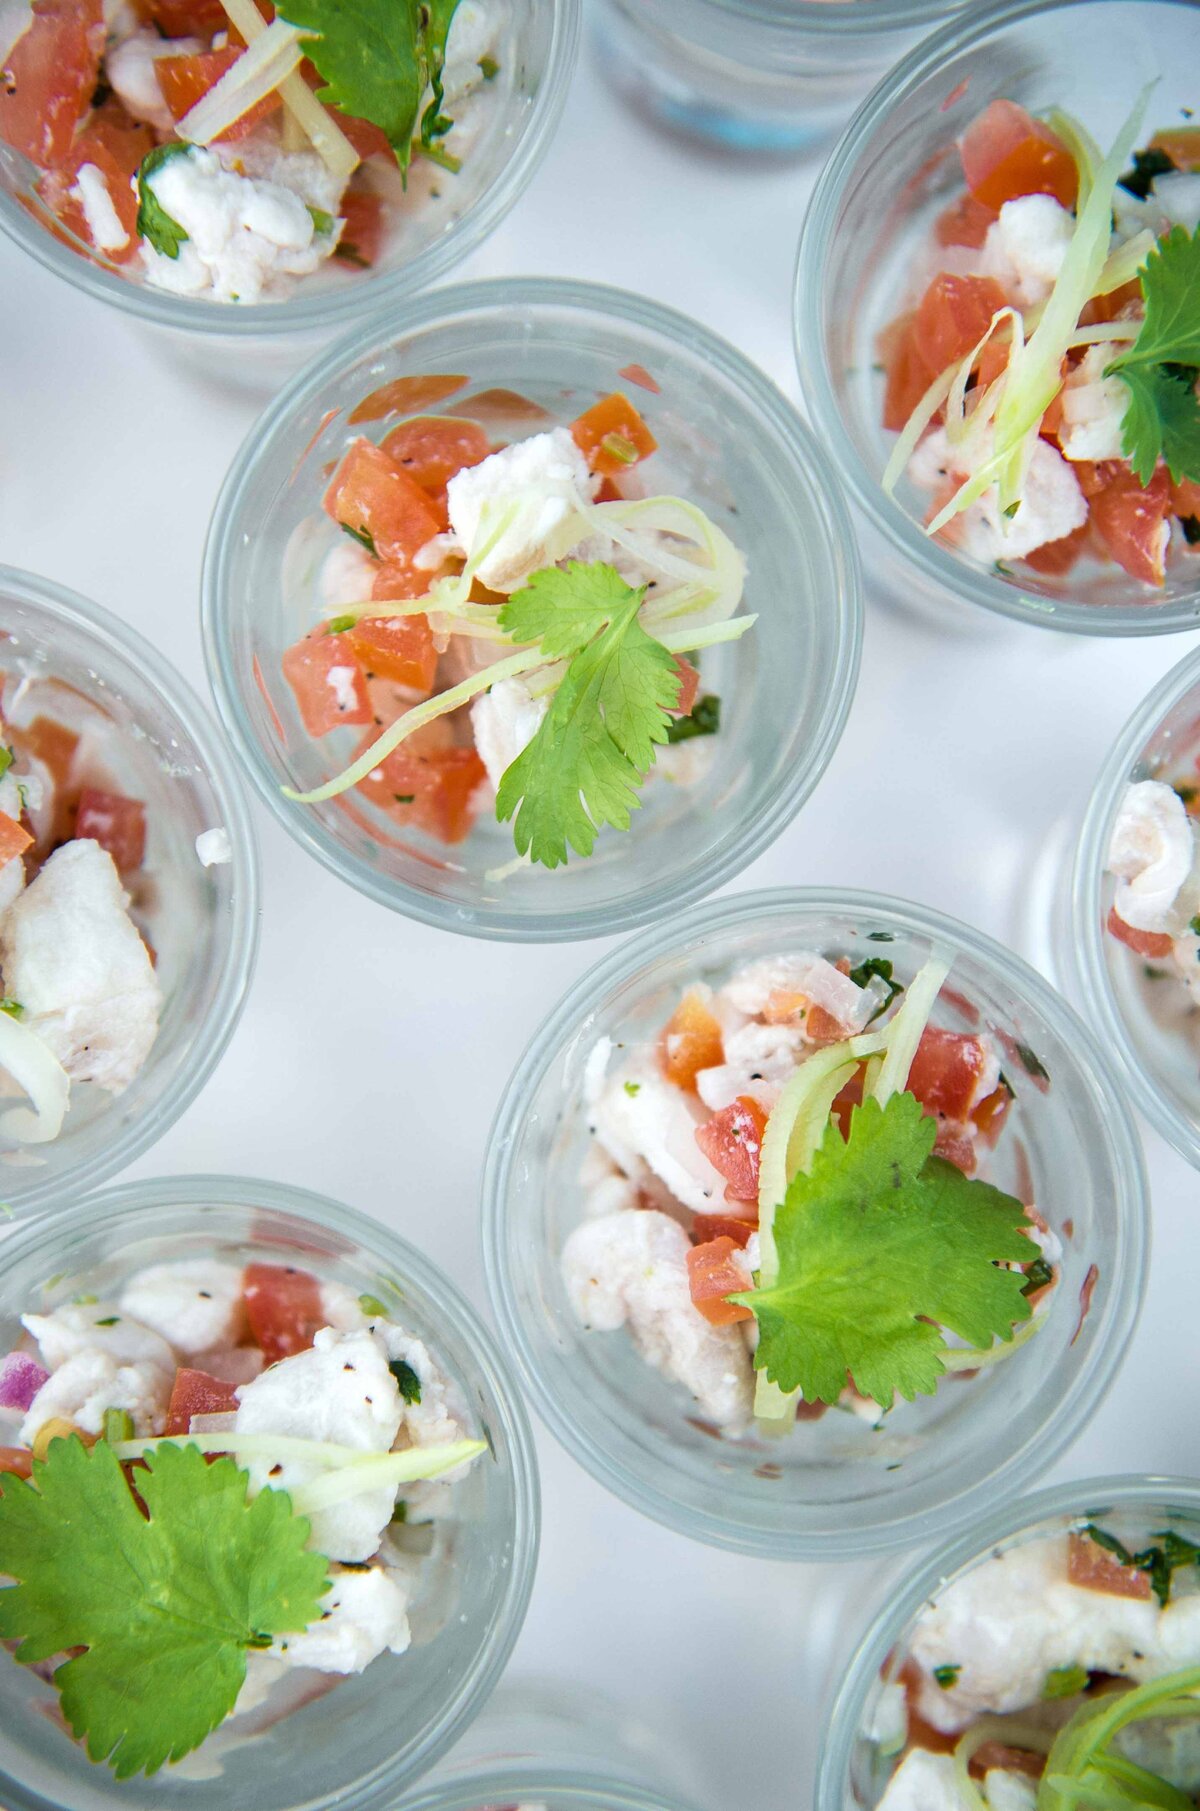 Covid Safe Ceviche serving ide for corporate event. It is served in individual classes.